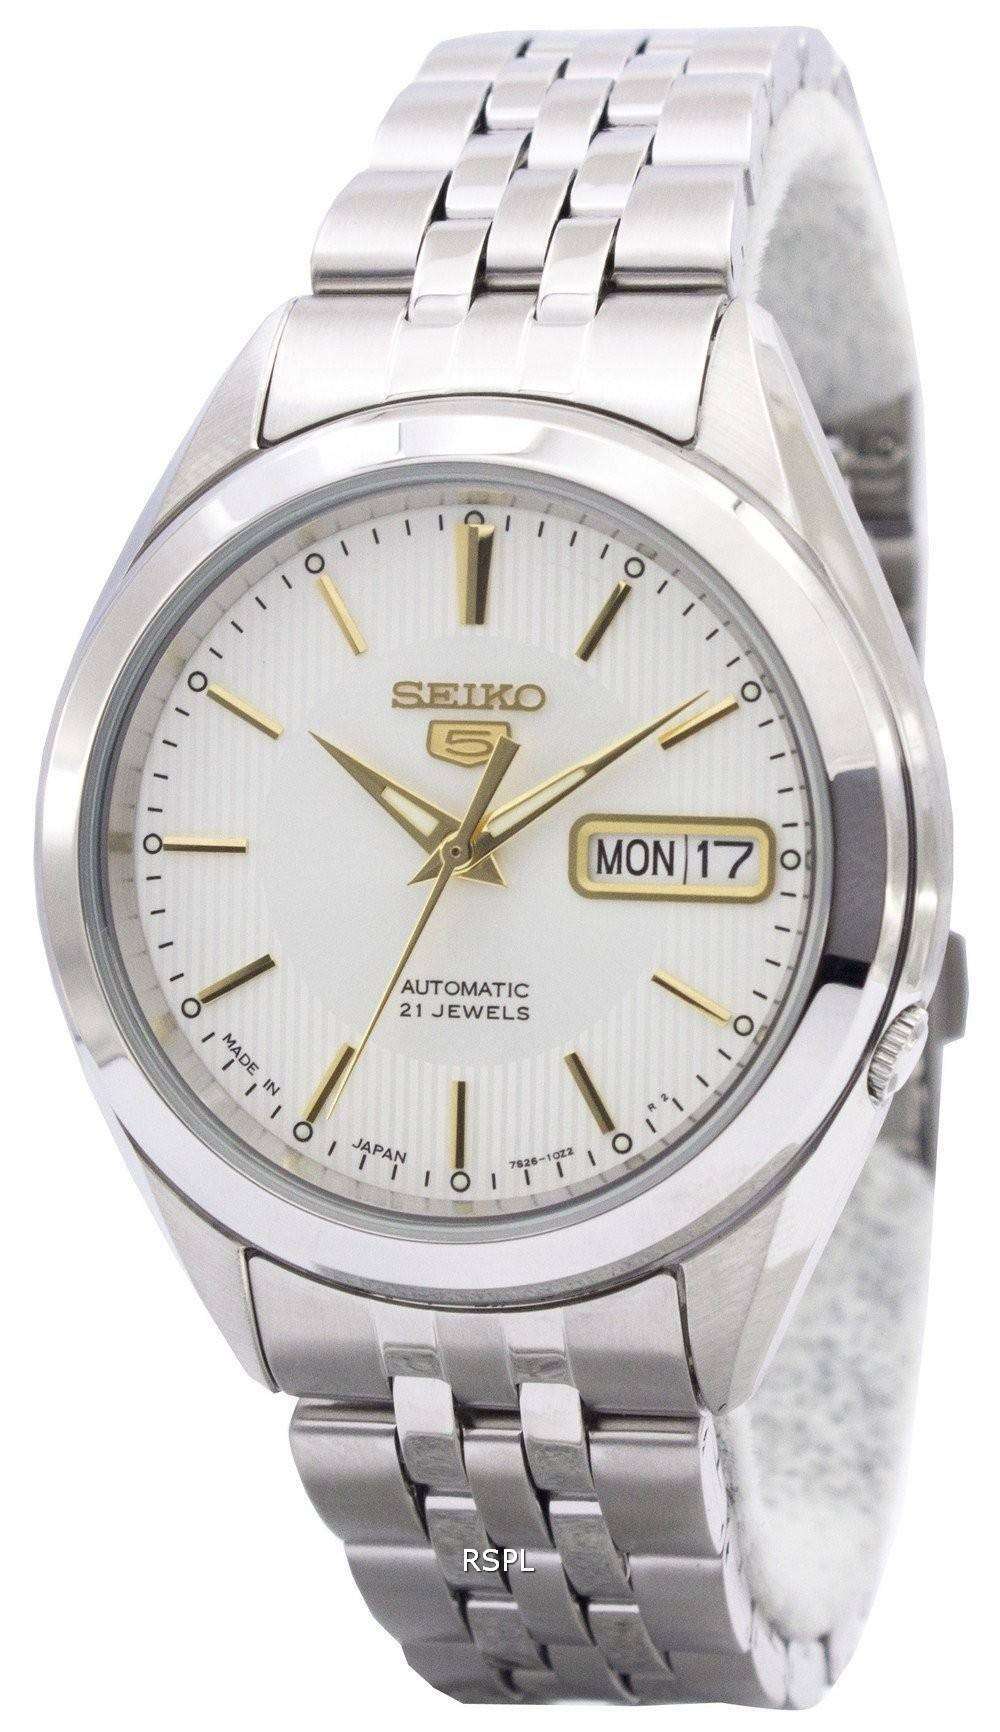 Seiko 5 Automatic 21 Jewels Japan Made Snkl17j1 Snkl17j Men S Watch Citywatches In